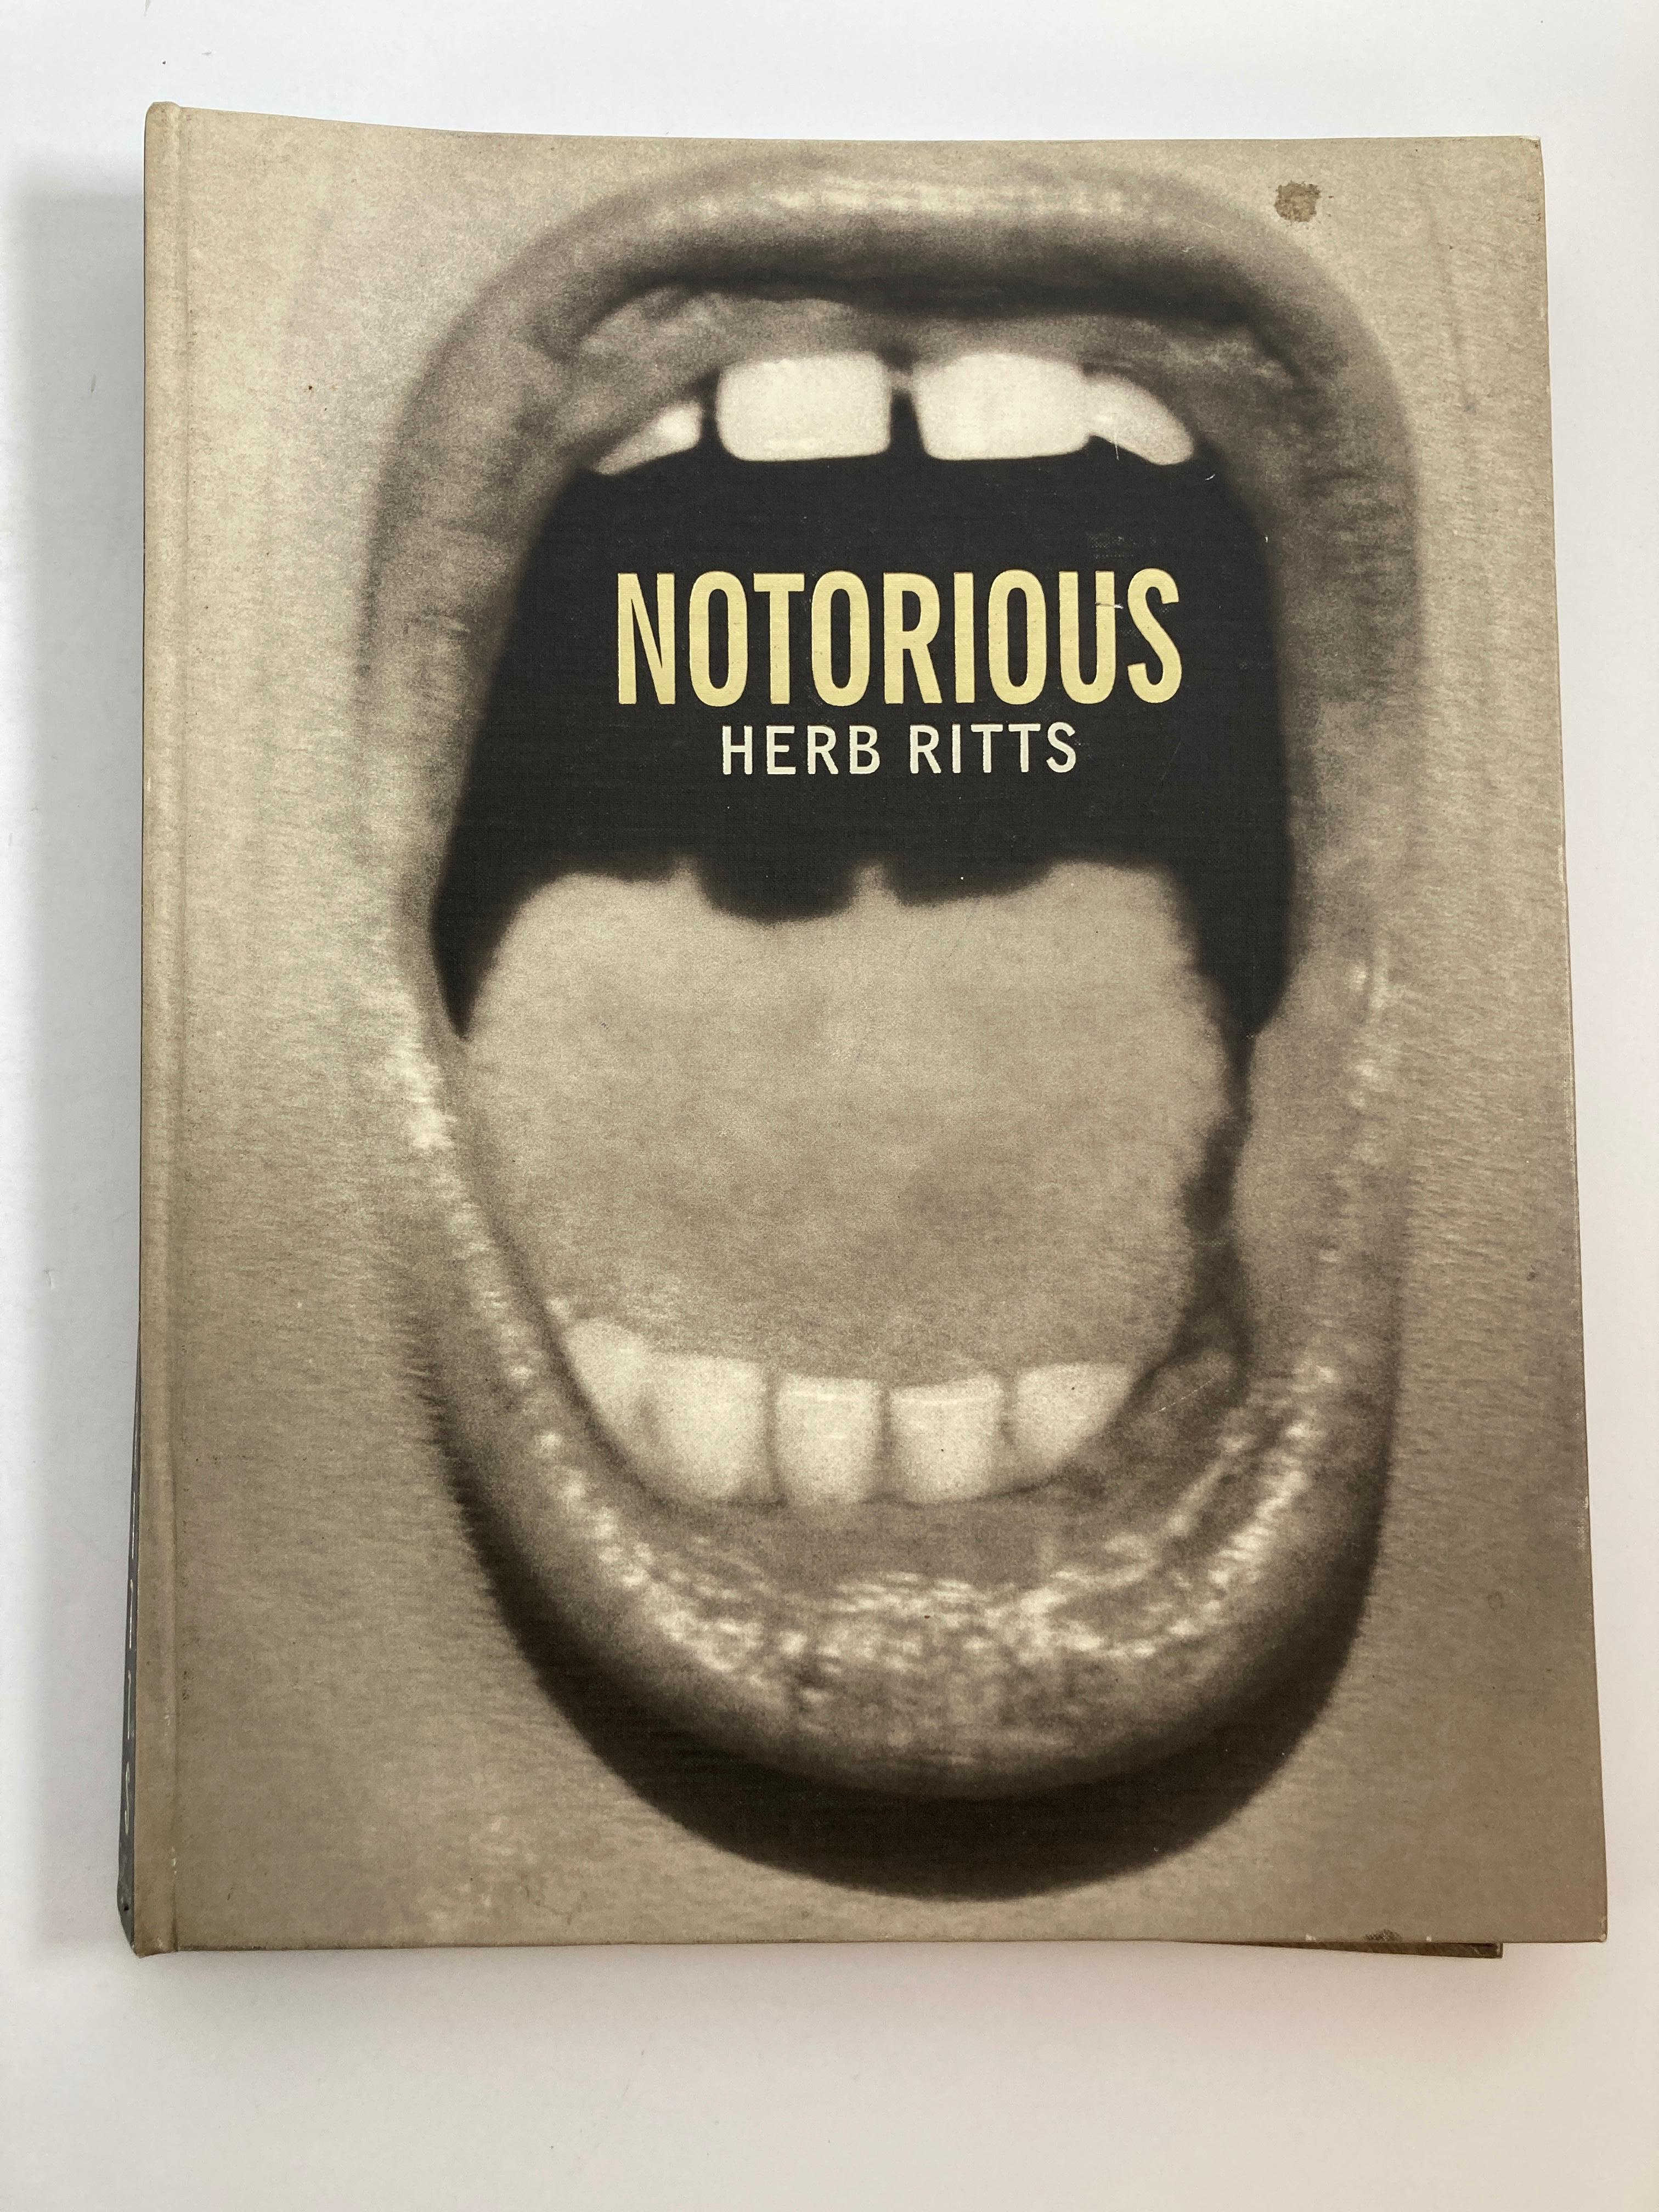 Notorious Hardcover book by Herb Ritts
The foremost photographer for Vanity Fair, Rolling Stone and Interview offers a sweeping array of virtually unpublished portraits of Madonna, Jack Nicholson, Elizabeth Taylor, William Burroughs, and other